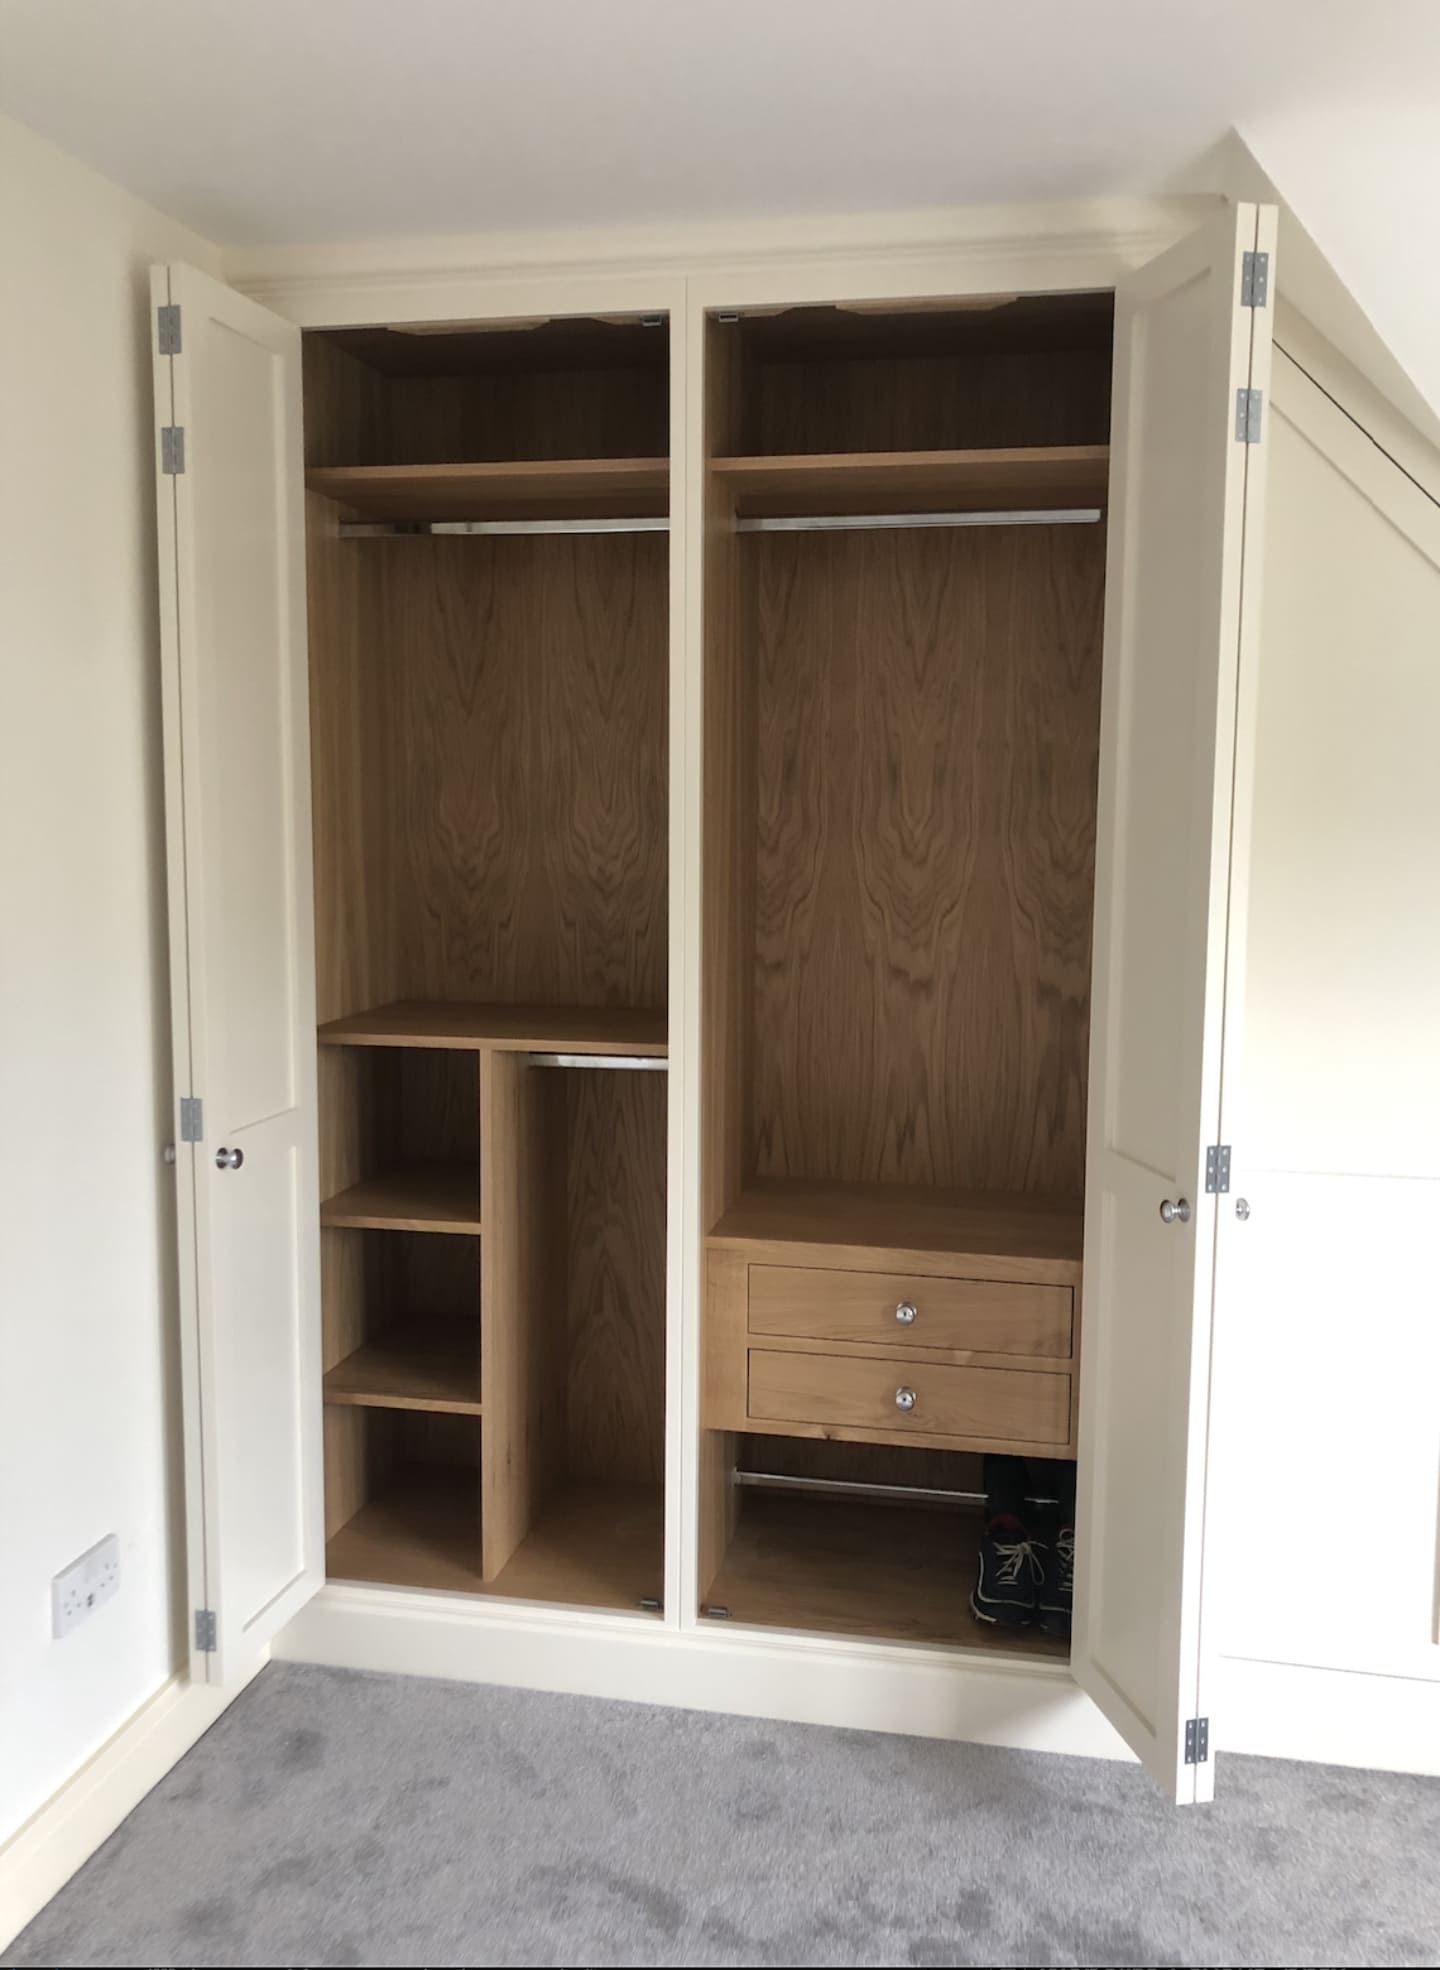 A bespoke fitted wardrobe with the doors open showing the custom interior.